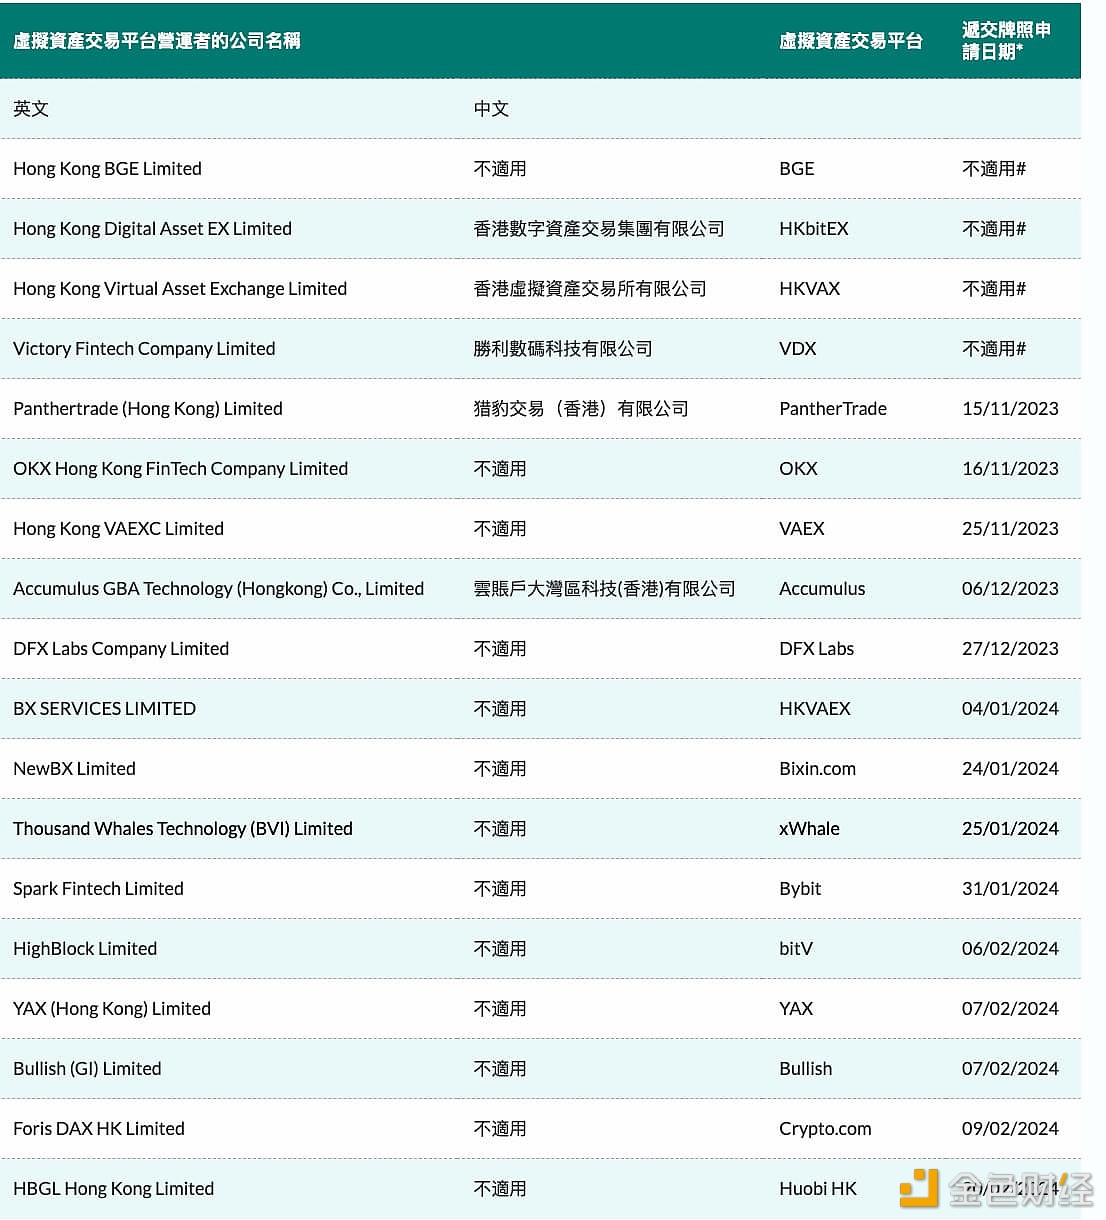 List of crypto entities that applied for an operational license with Hong Kong SFC.